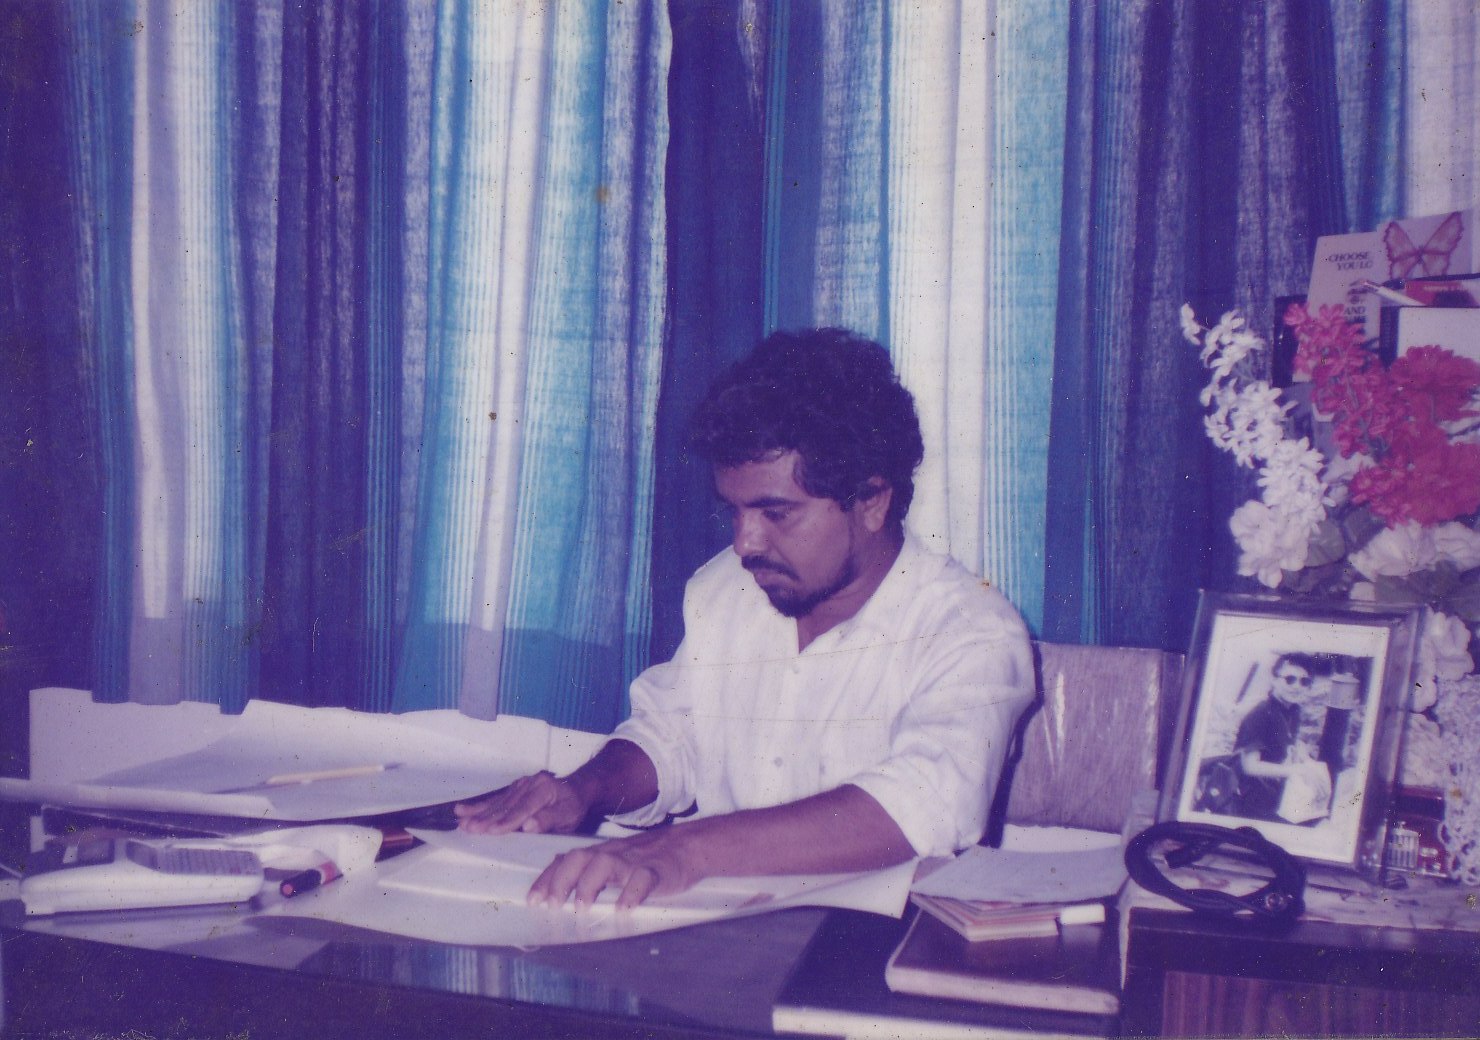 Sri Lanka Archives - Committee to Protect Journalists